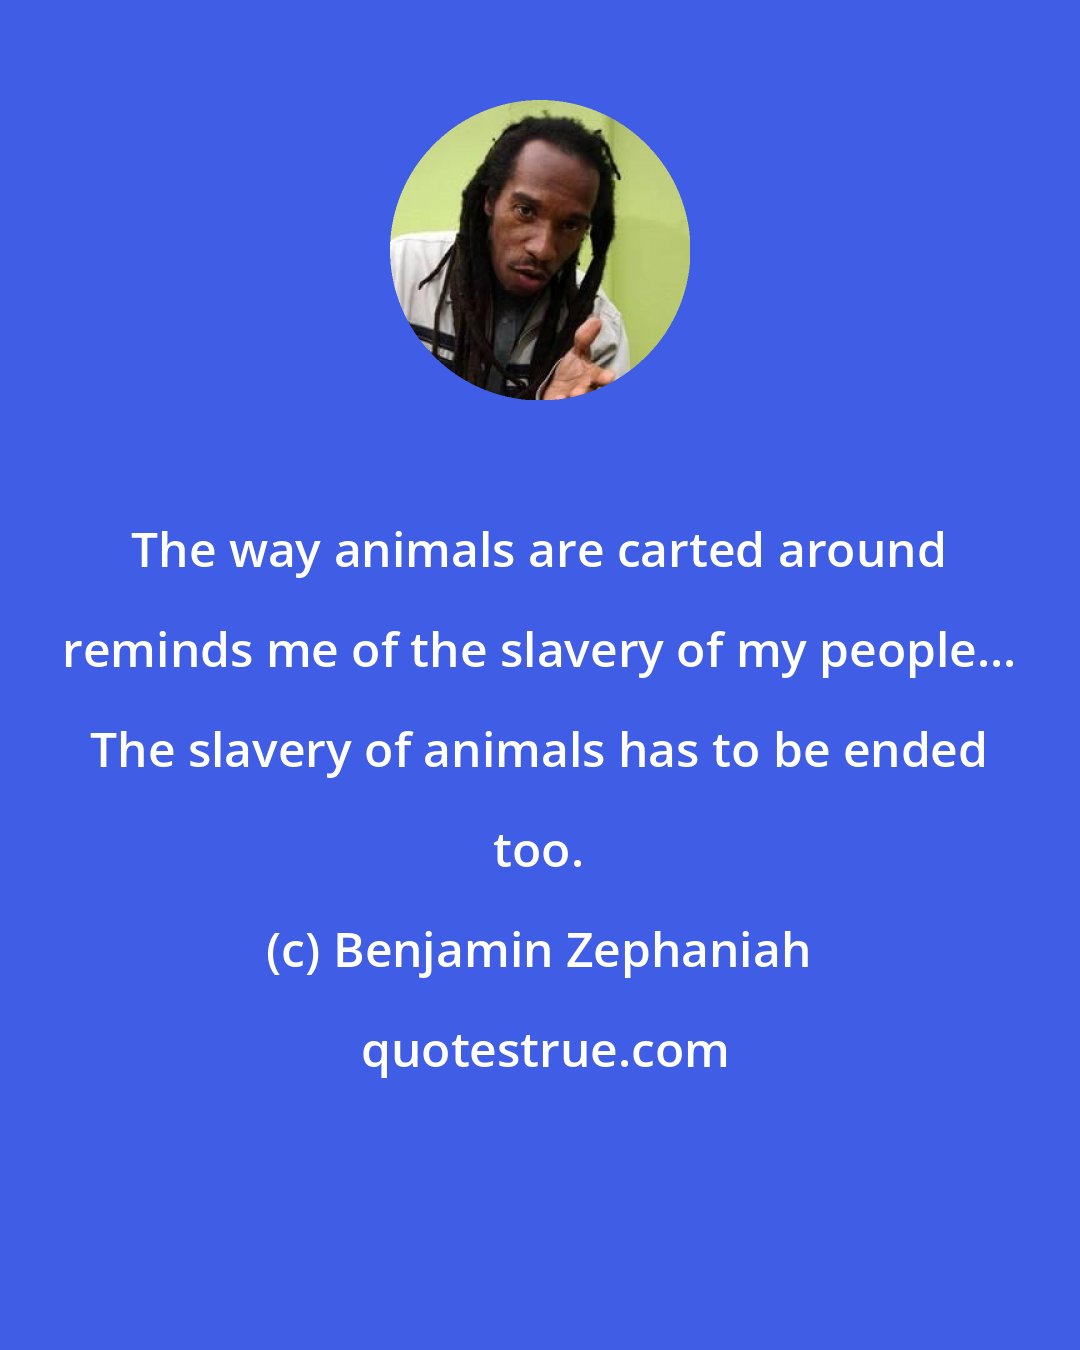 Benjamin Zephaniah: The way animals are carted around reminds me of the slavery of my people... The slavery of animals has to be ended too.